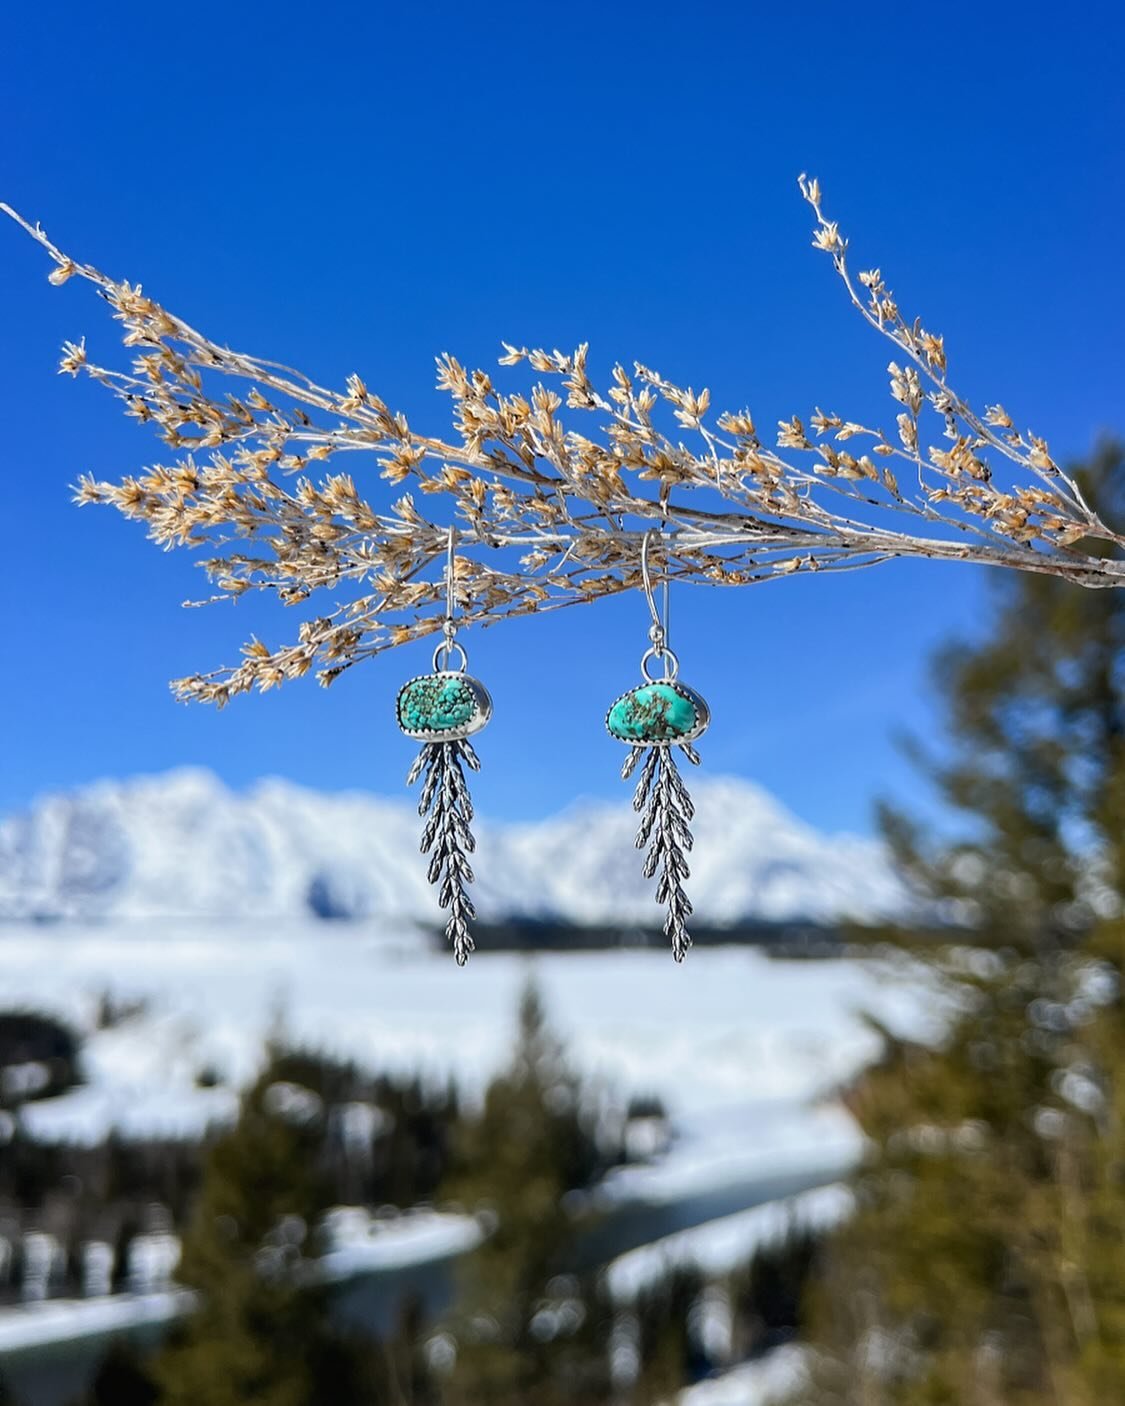 Hello Everyone, it&rsquo;s been a minute! I&rsquo;m going to have a small &ldquo;surprise&rdquo; shop update coming your way this Saturday at 9:30am MST! These little babes featuring Kingman Turquoise nuggets with cedar sprig castings will be availab